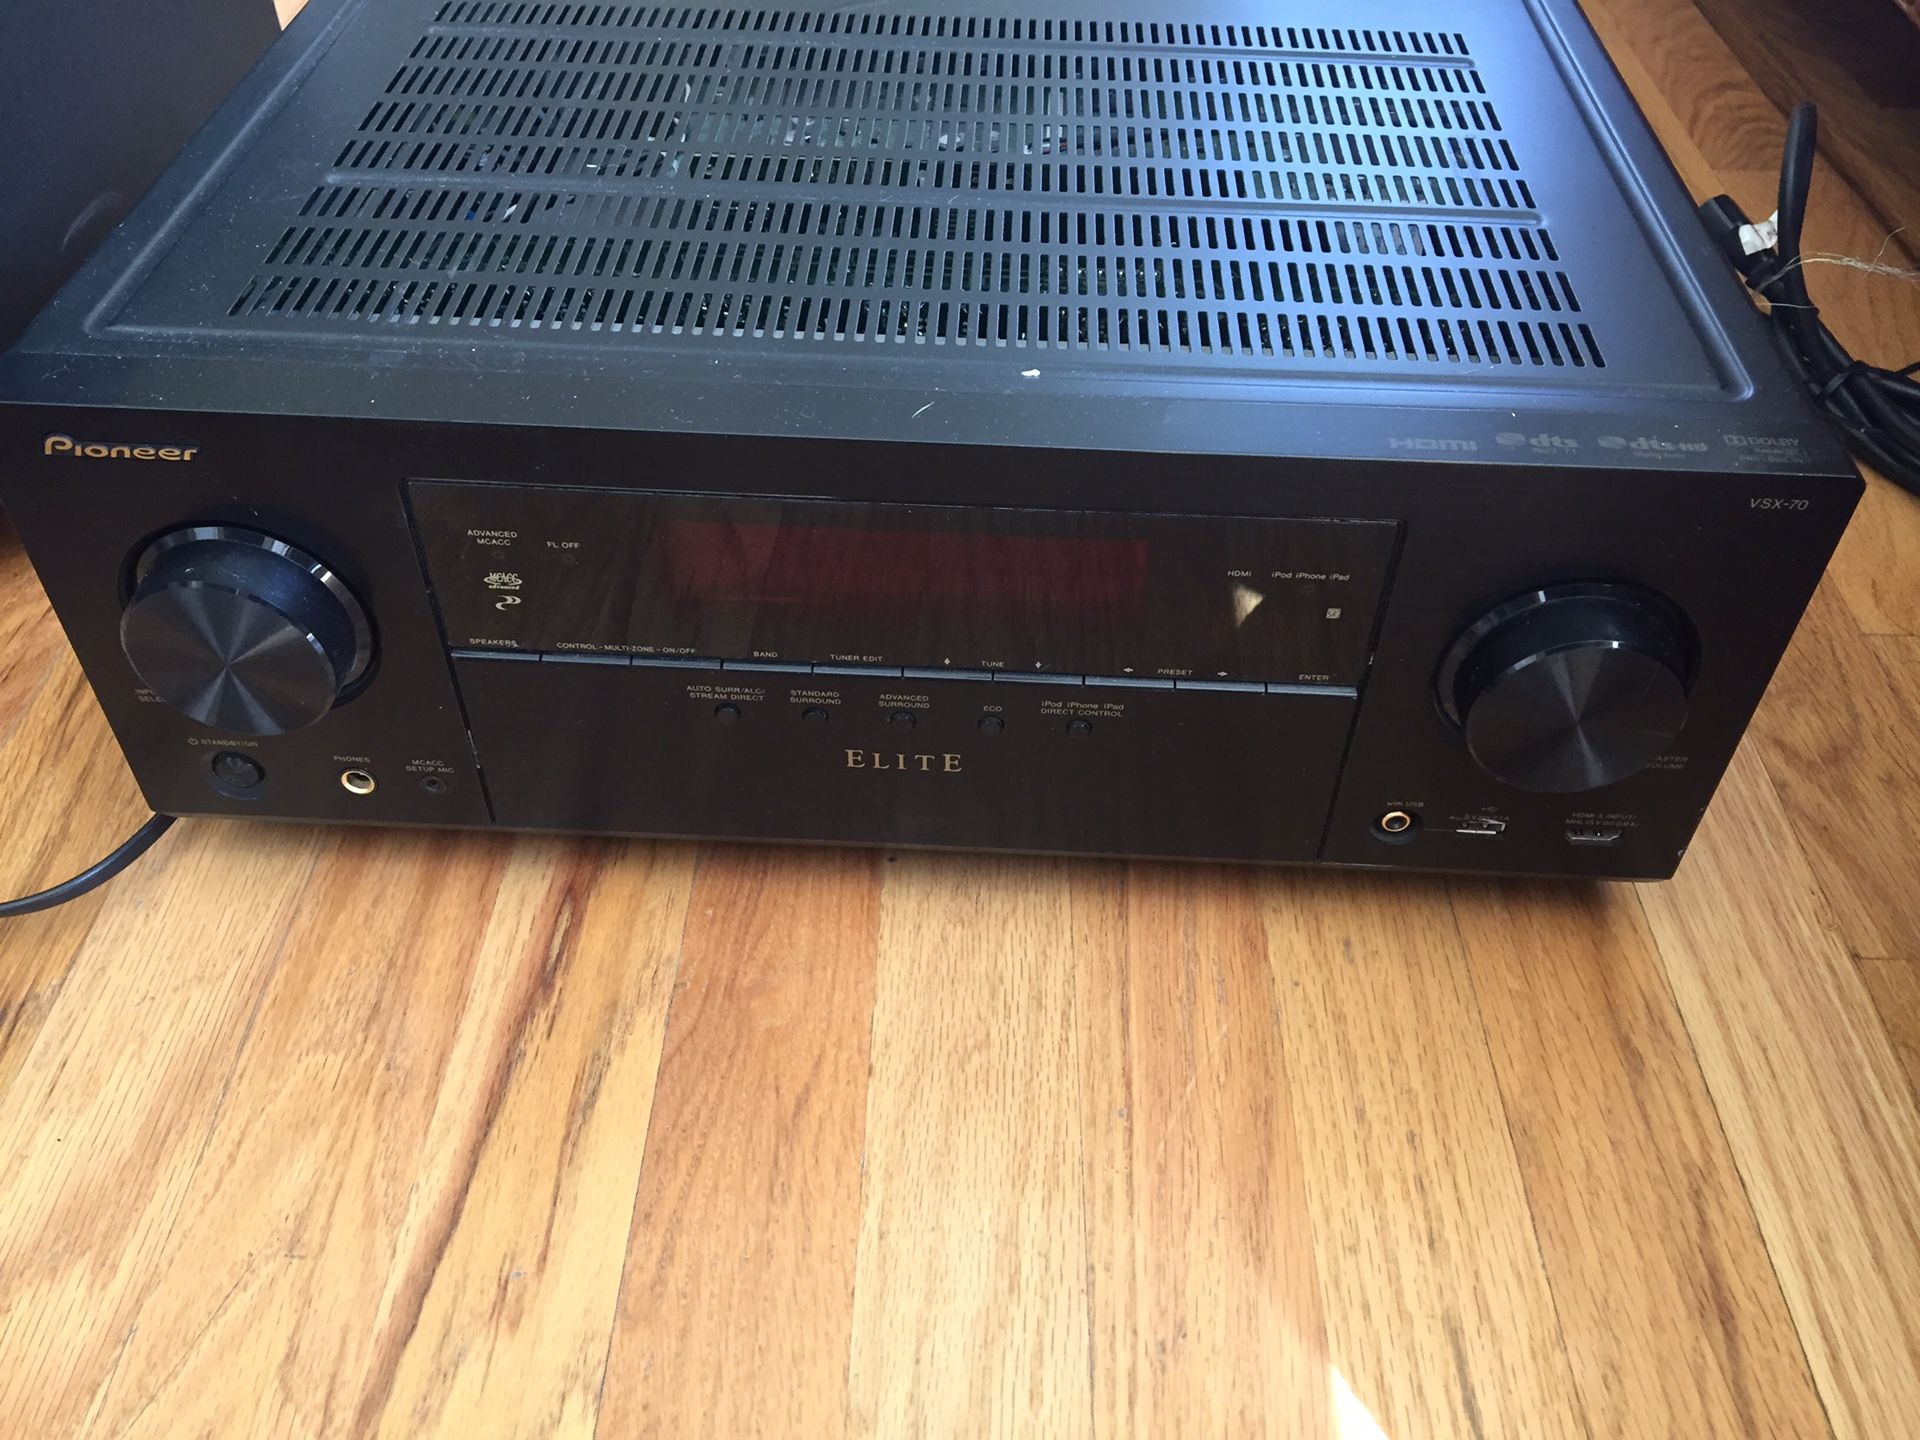 Pioneer receiver for sale!